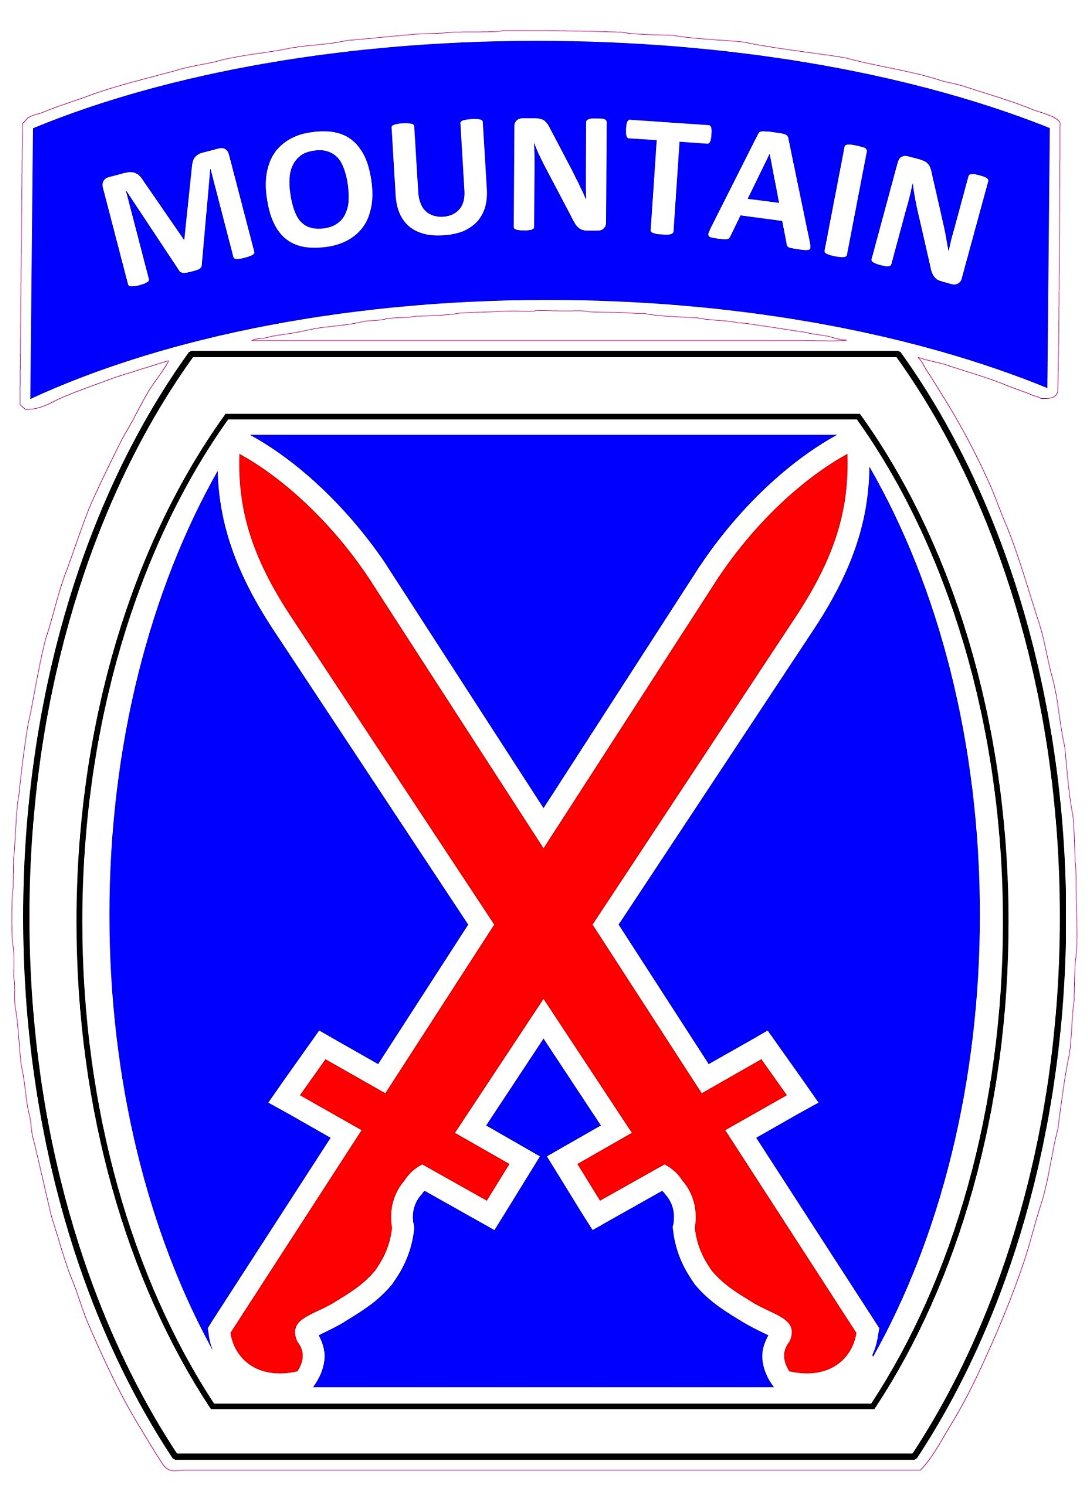 U.S. Army 10th Mountain Division Decal - Army Decal, Army Sticker, automotive decals, automotive stickers, bumper decals, decals, Military and Veterans Decals, Military decals, military stickers, U.S. Army 10th Mountain Division Decal, vehicle decals, Vehicle stickers, window decal, window decals, window sticker, window stickers | American Patriots Decals | High Quality Military and Veterans Die-Cut Decals